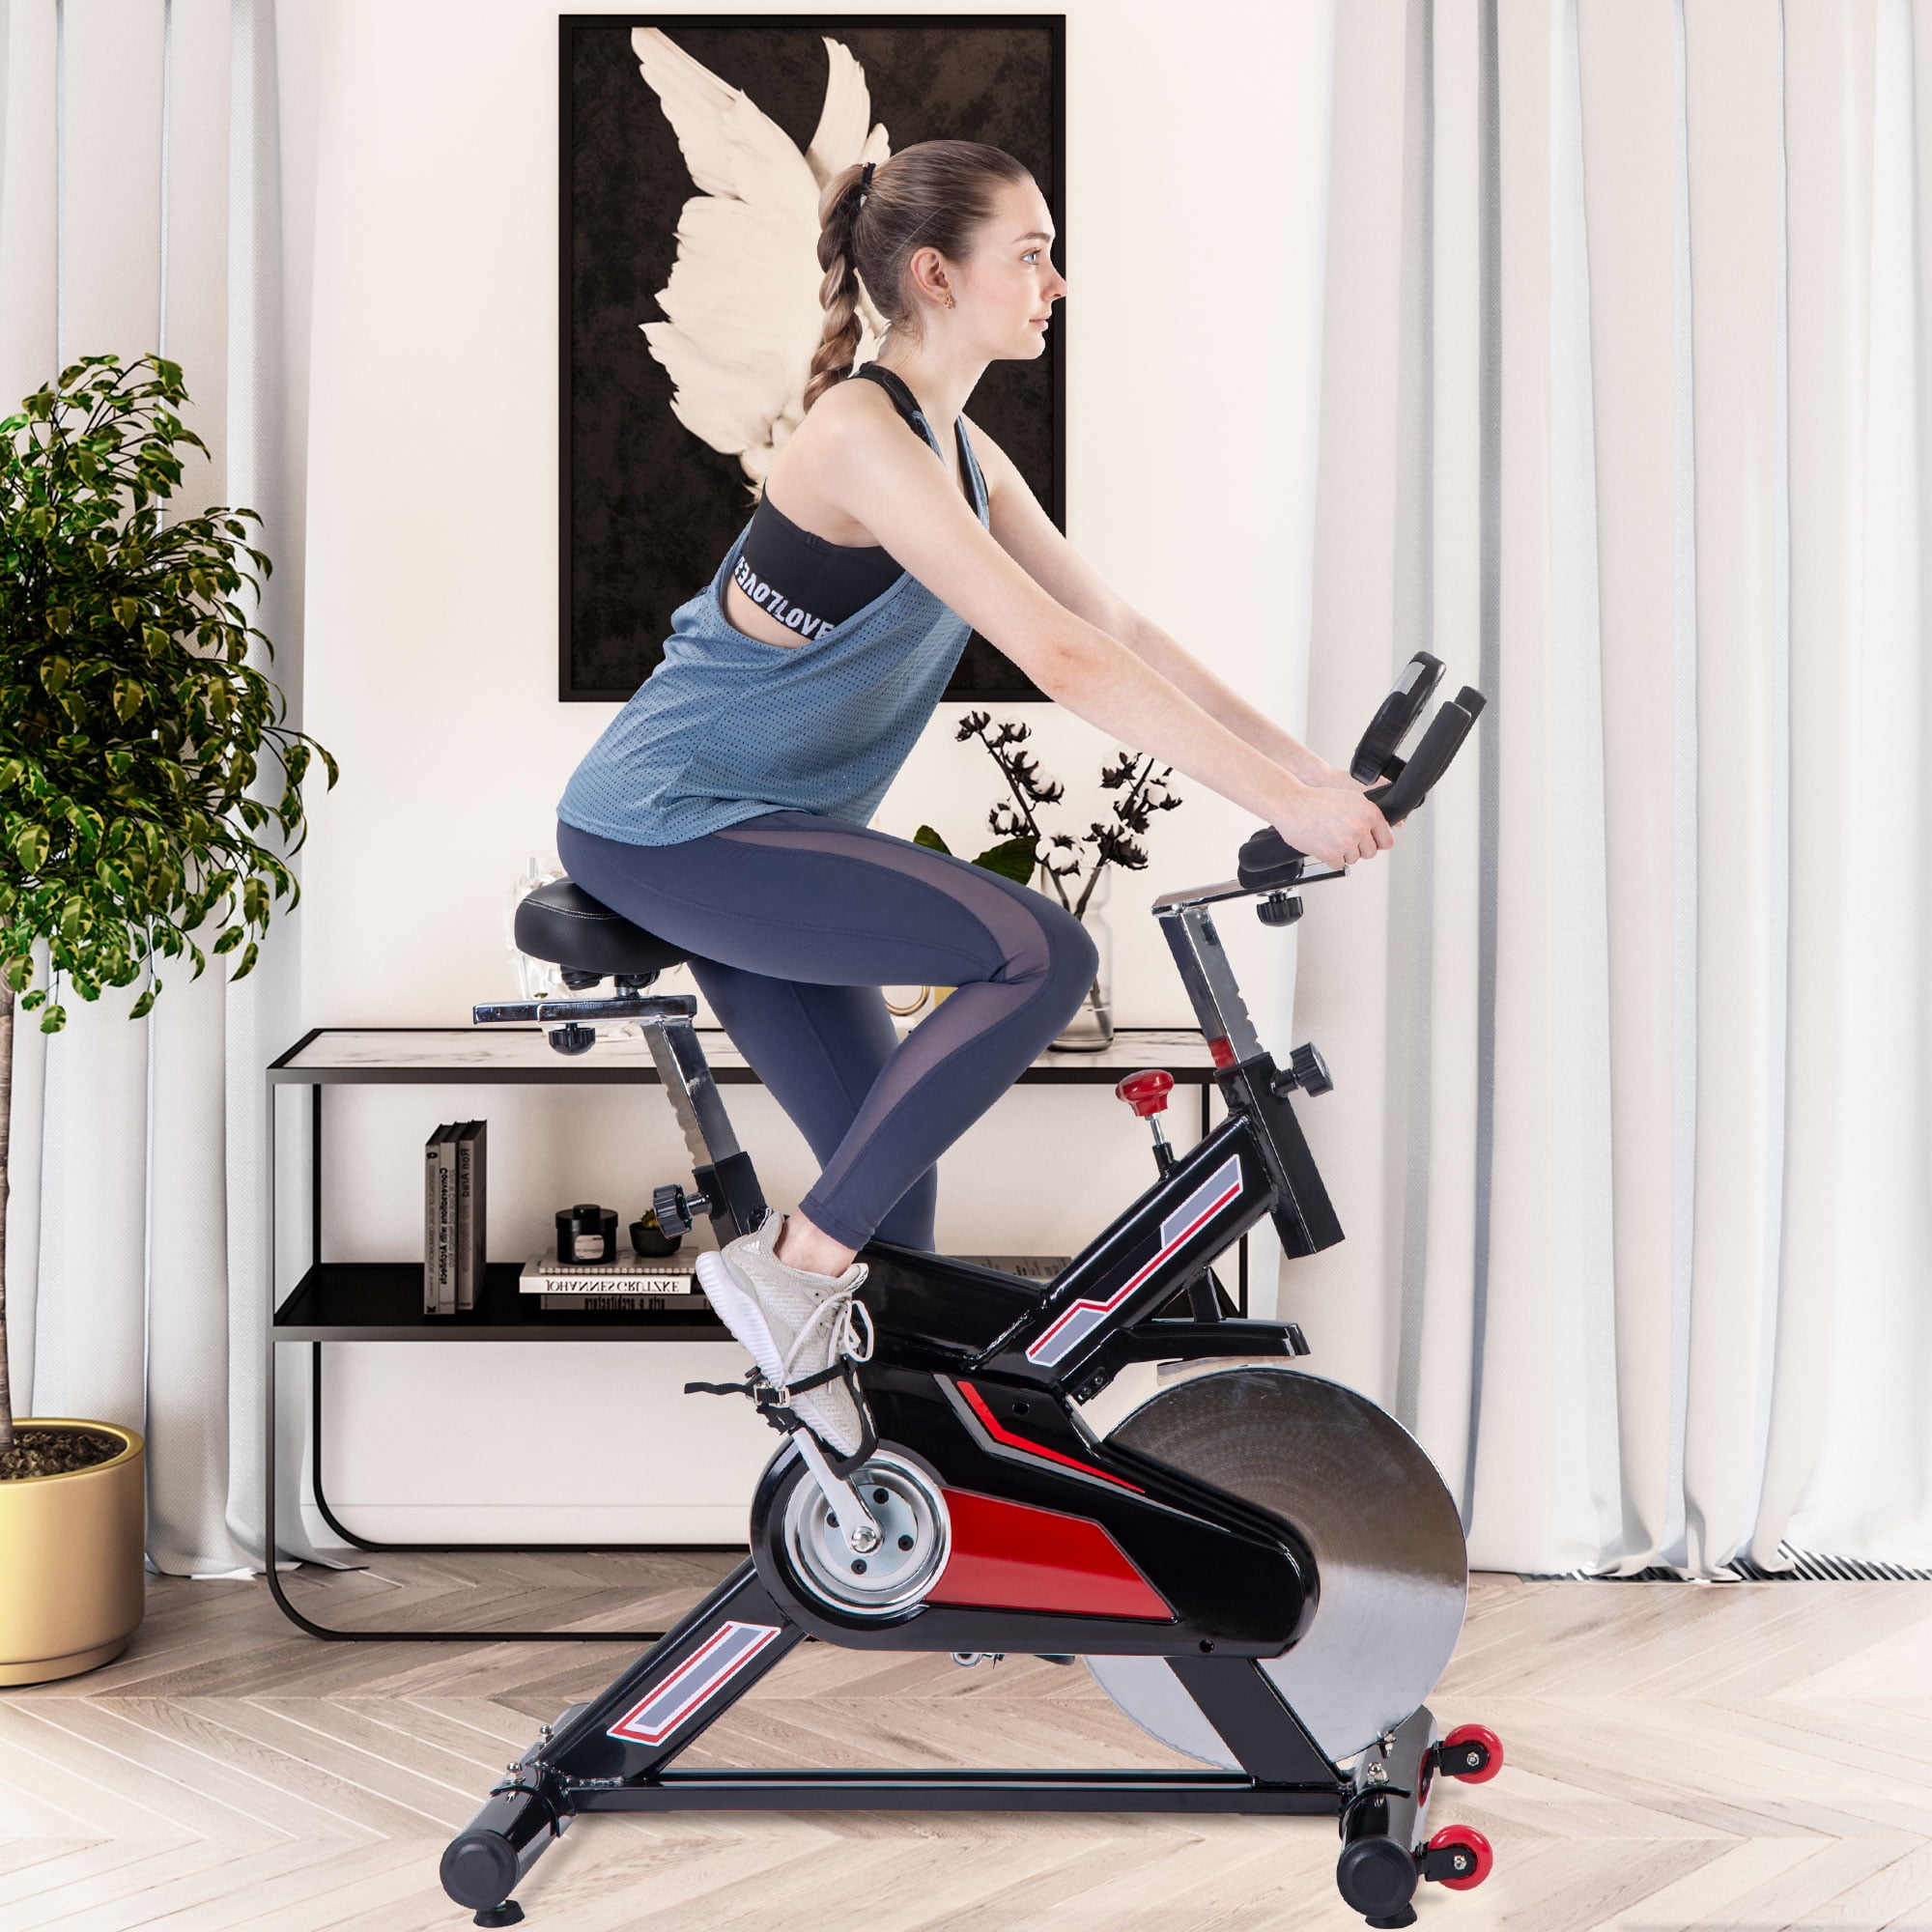 Home Indoor Adjustable Exercise Bike Cardio Workout Cycling Gym Training Fitness 